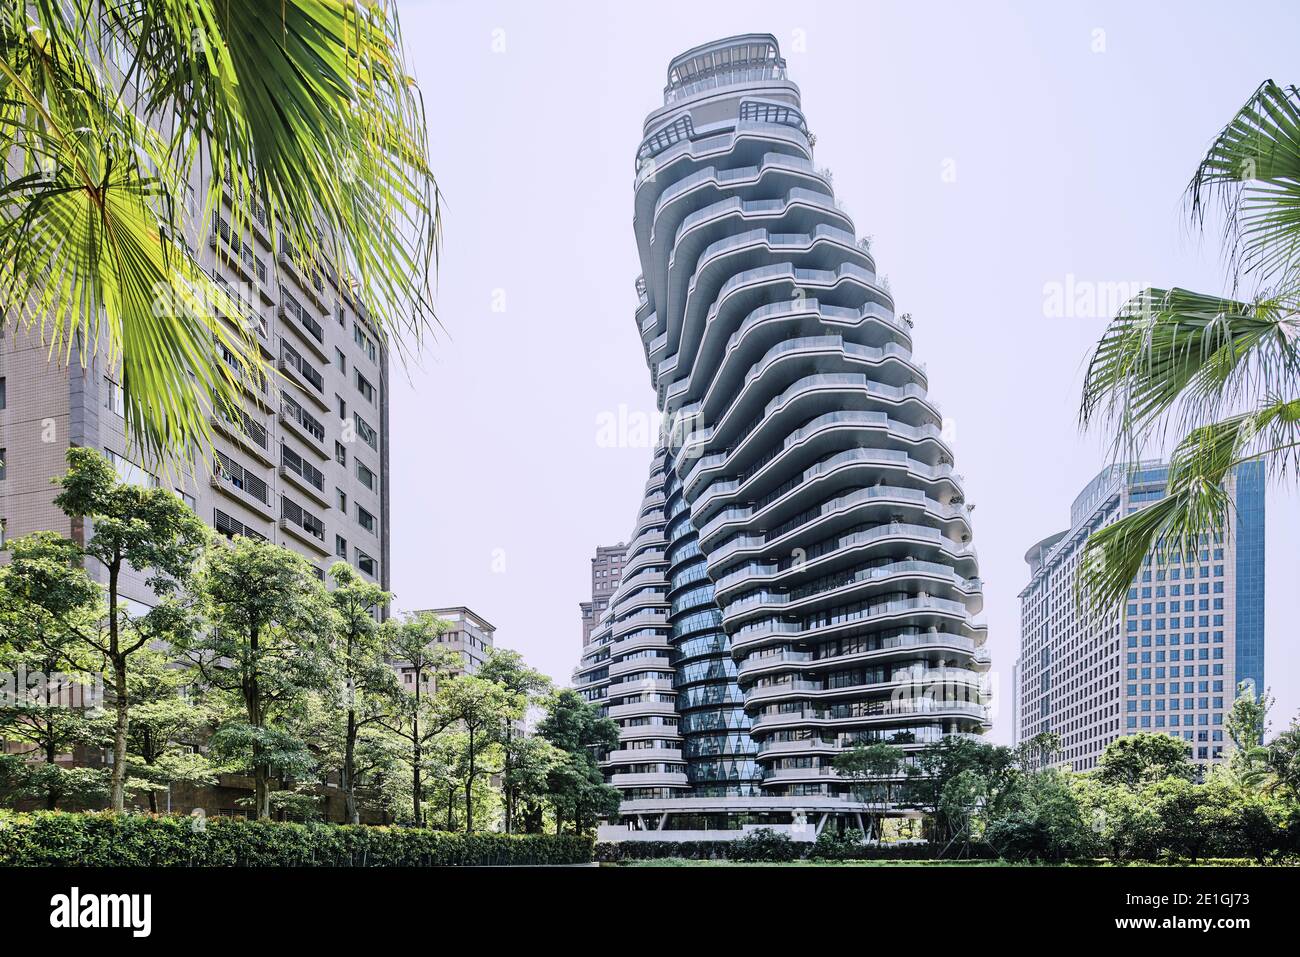 Exterior view of the Tao Zhu Yin Yuan Tower, or Agora Garden, a sustainable residential tower in the shape of a double-helix in Taipei, Taiwan. Stock Photo